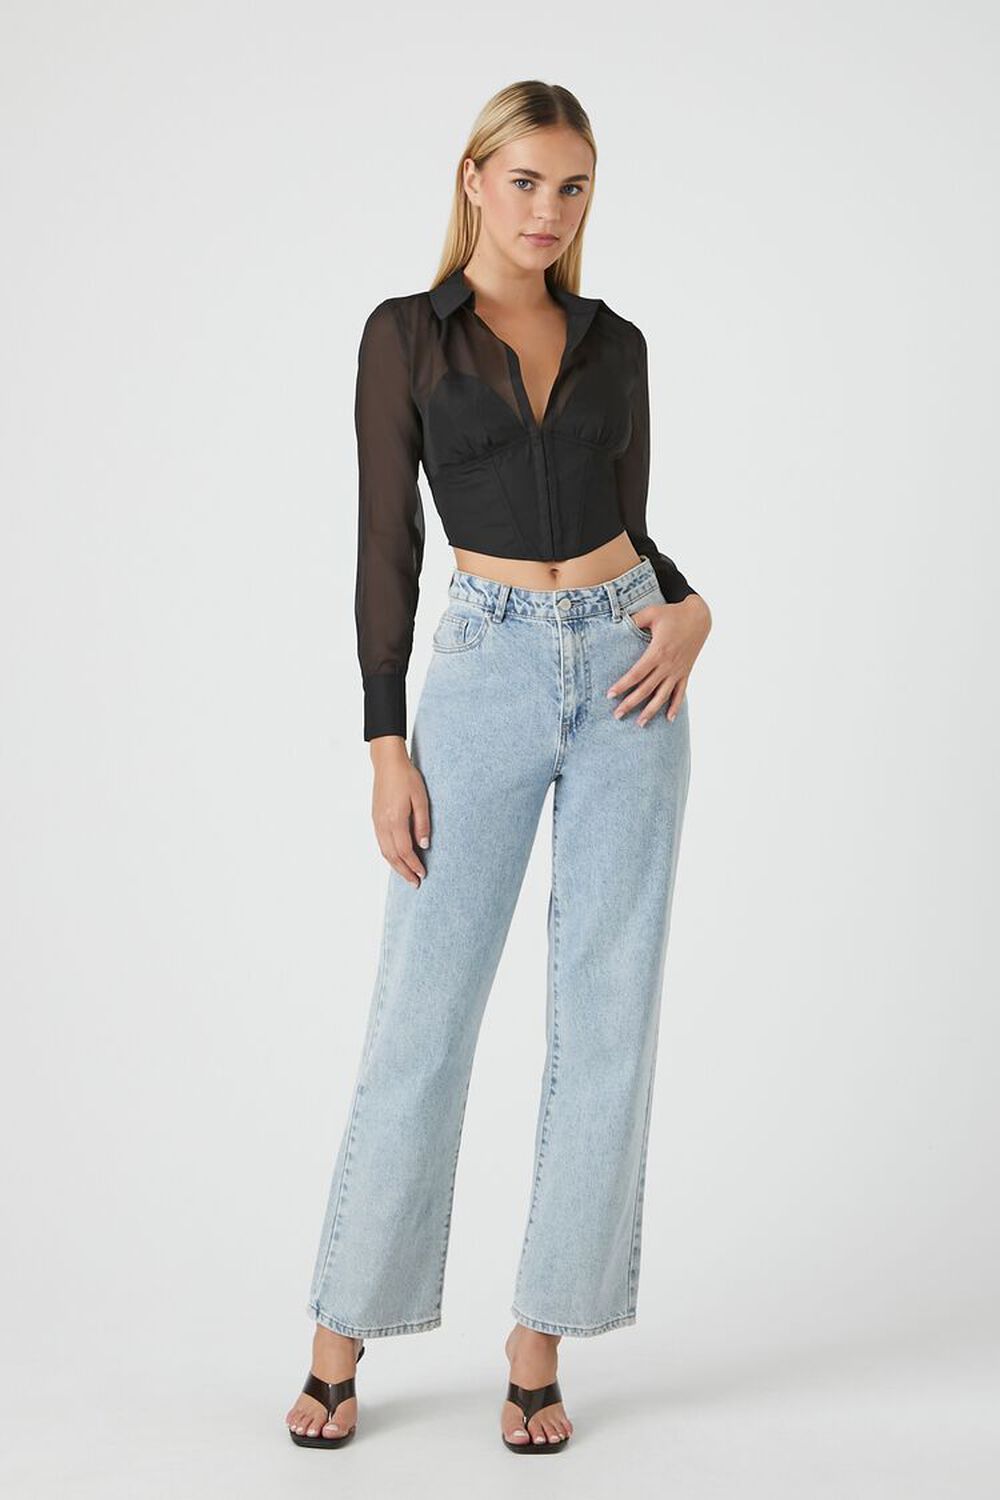 Forever 21 Women's Sheer Combo Hook-and-Eye Crop Top in Black Medium | Date Night & Going Out, Party Outfits | 100% Poplin | F21